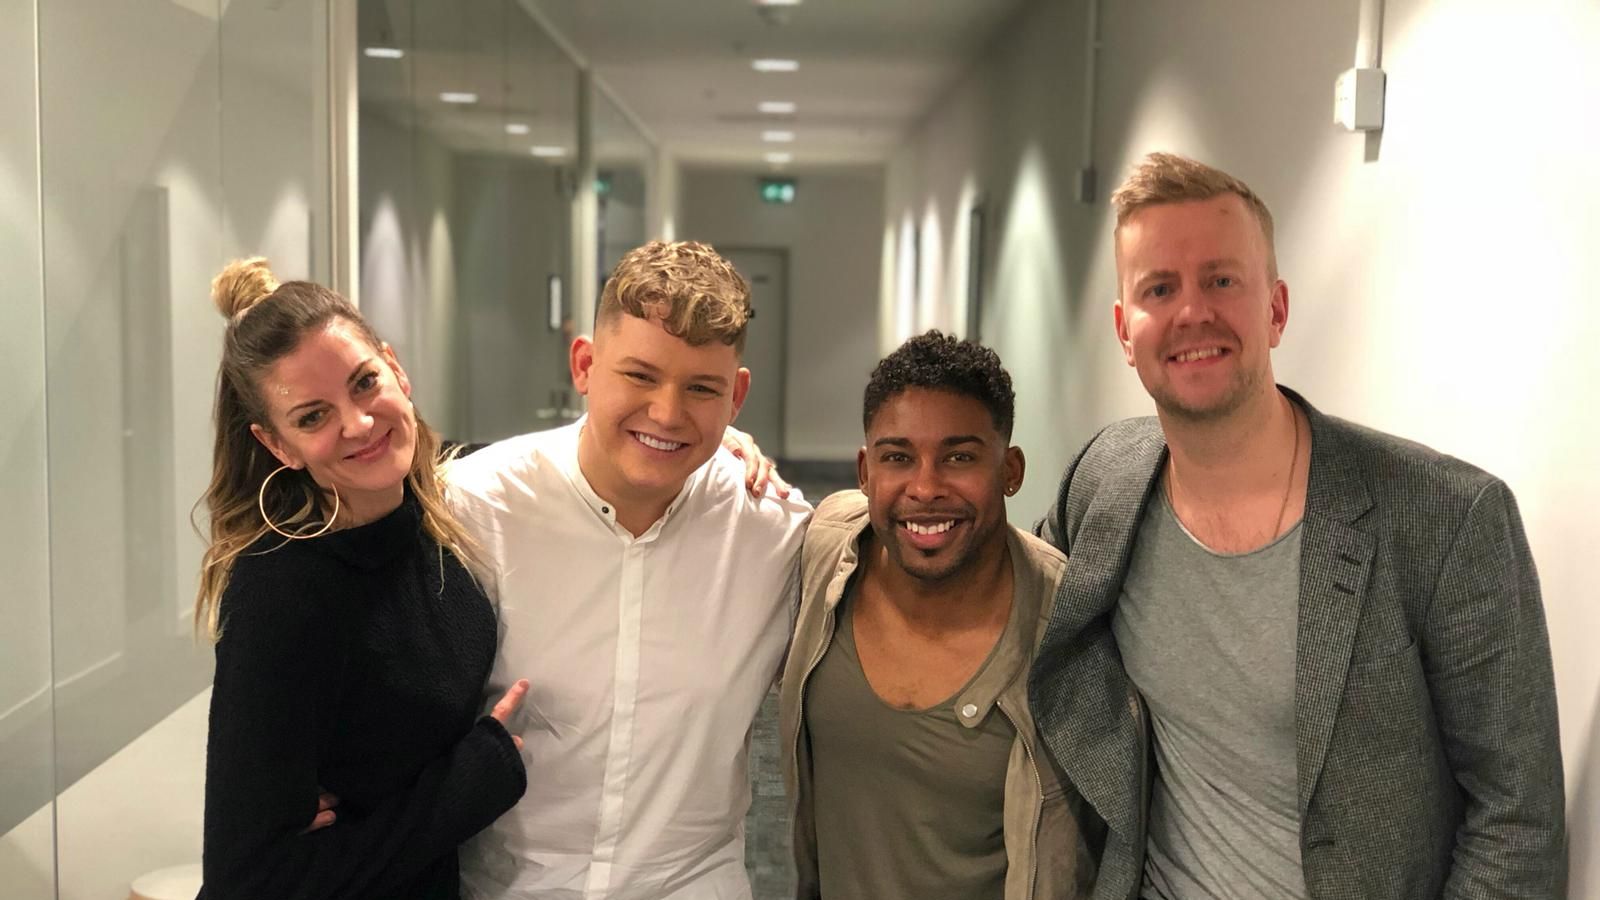 Mance Zelmerlo and John Lundvik succeeded in England